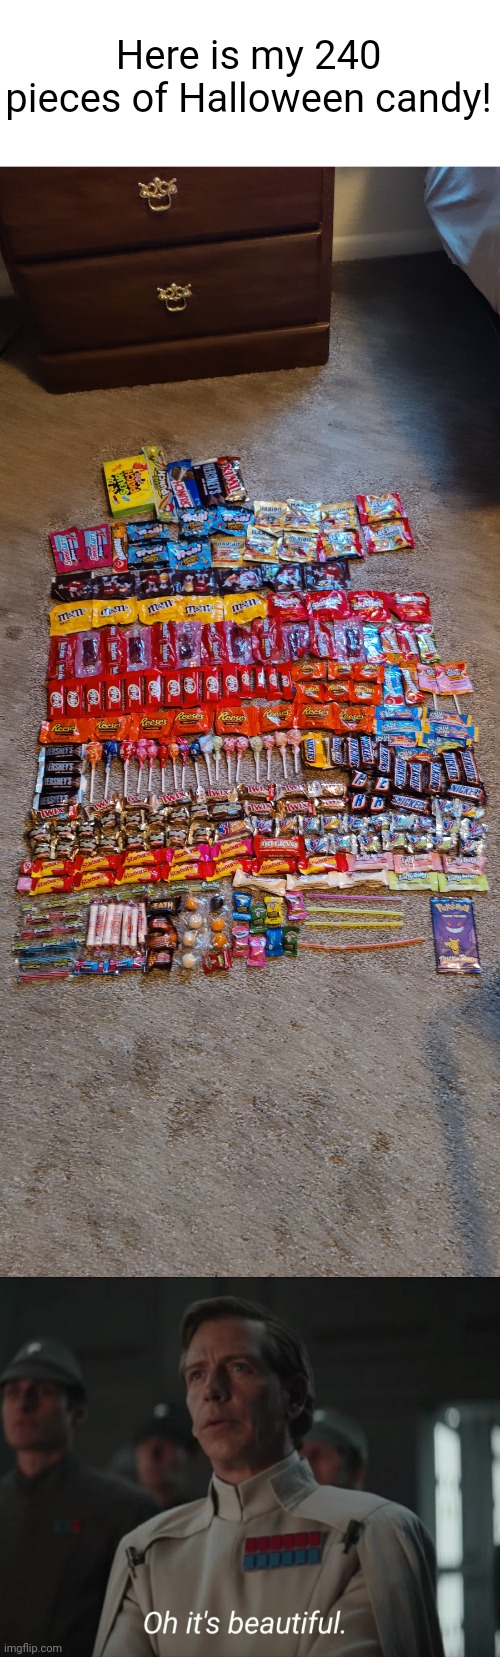 Note in comments (#3,577) | Here is my 240 pieces of Halloween candy! | image tagged in oh it's beautiful,memes,candy,organized,halloween,flick7 | made w/ Imgflip meme maker